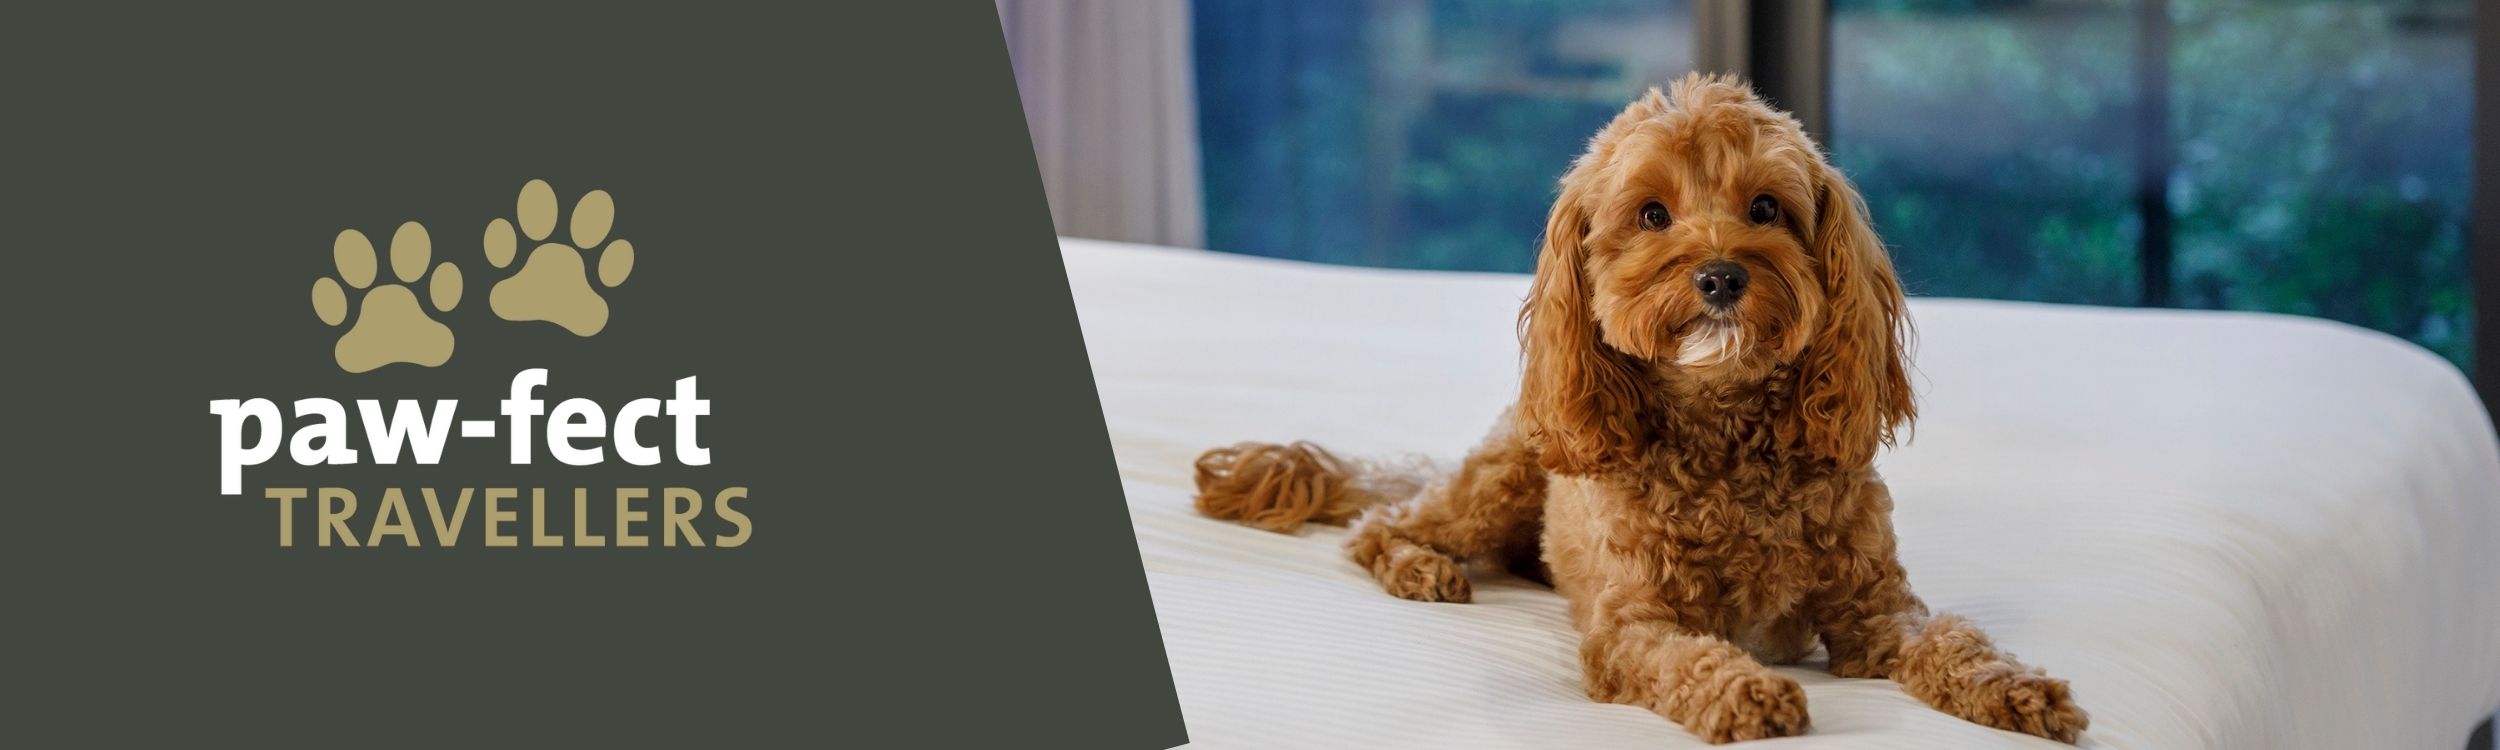 pet friendly accommodation - quest apartment hotels - 1